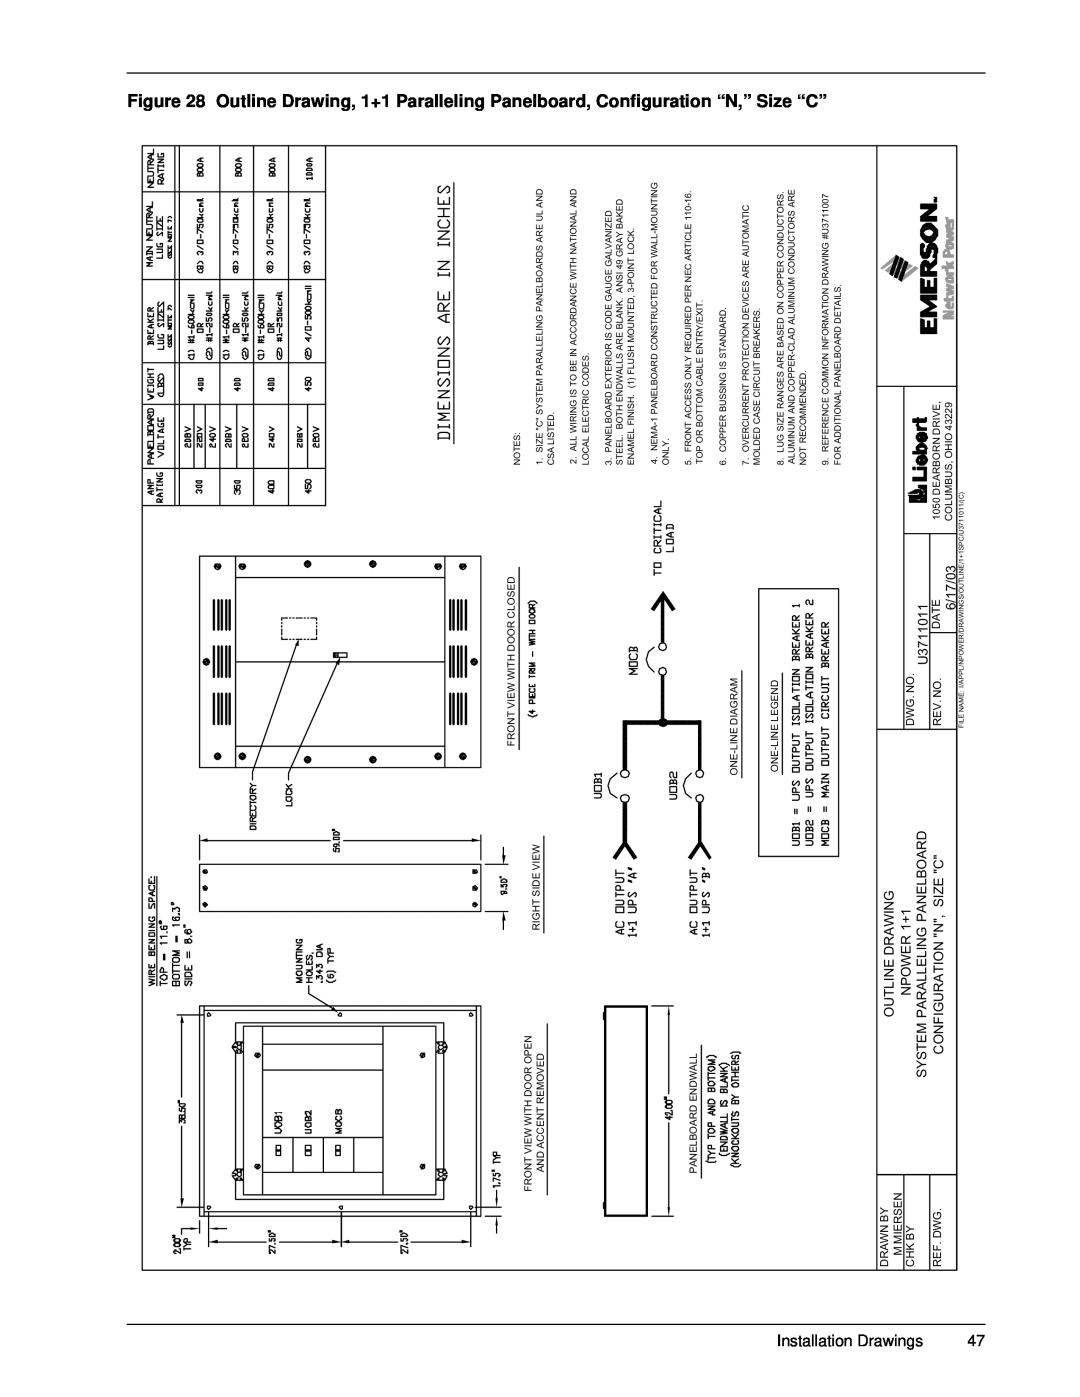 Emerson 30-130 kVA installation manual Outline Drawing, NPOWER 1+1, Configuration N, Size C, 6/17/03 